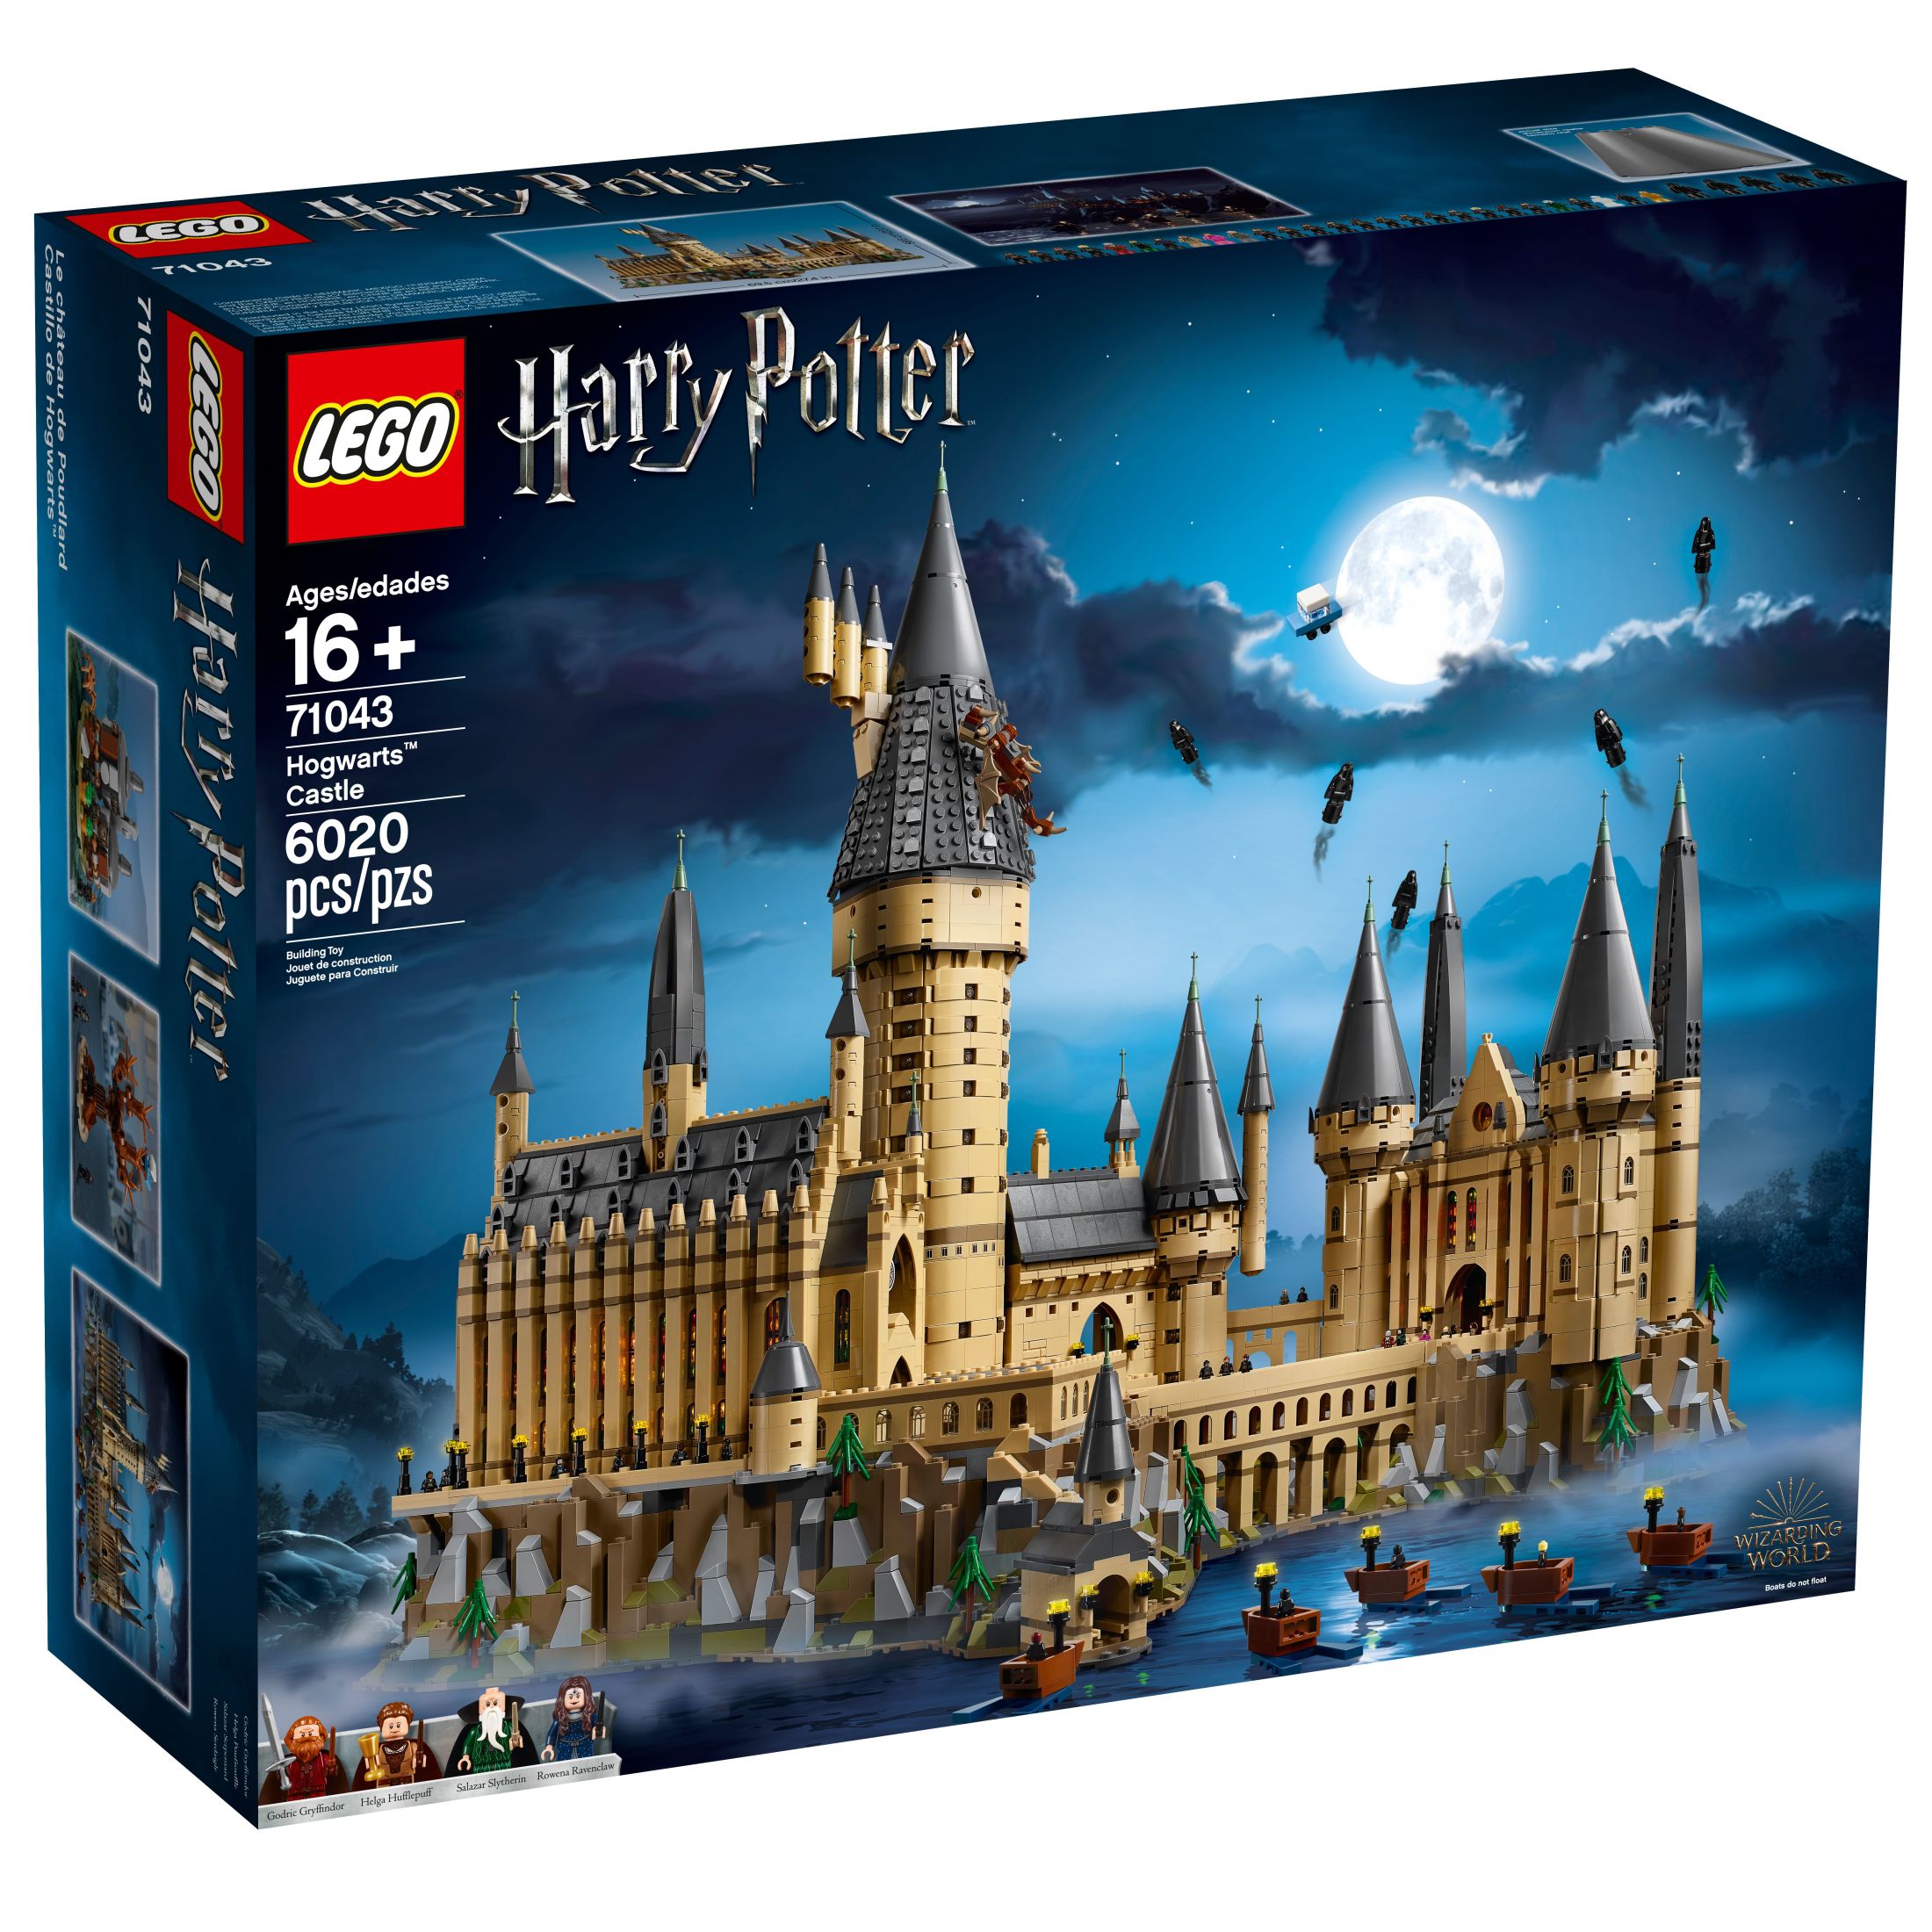 LEGO Harry Potter Hogwarts Castle 71043 Building Set - Model Kit with Minifigures, Featuring Wand, Boats, and Spider Figure, Gryffindor and Hufflepuff Accessories, Collectible for Adults and Teens - image 4 of 8